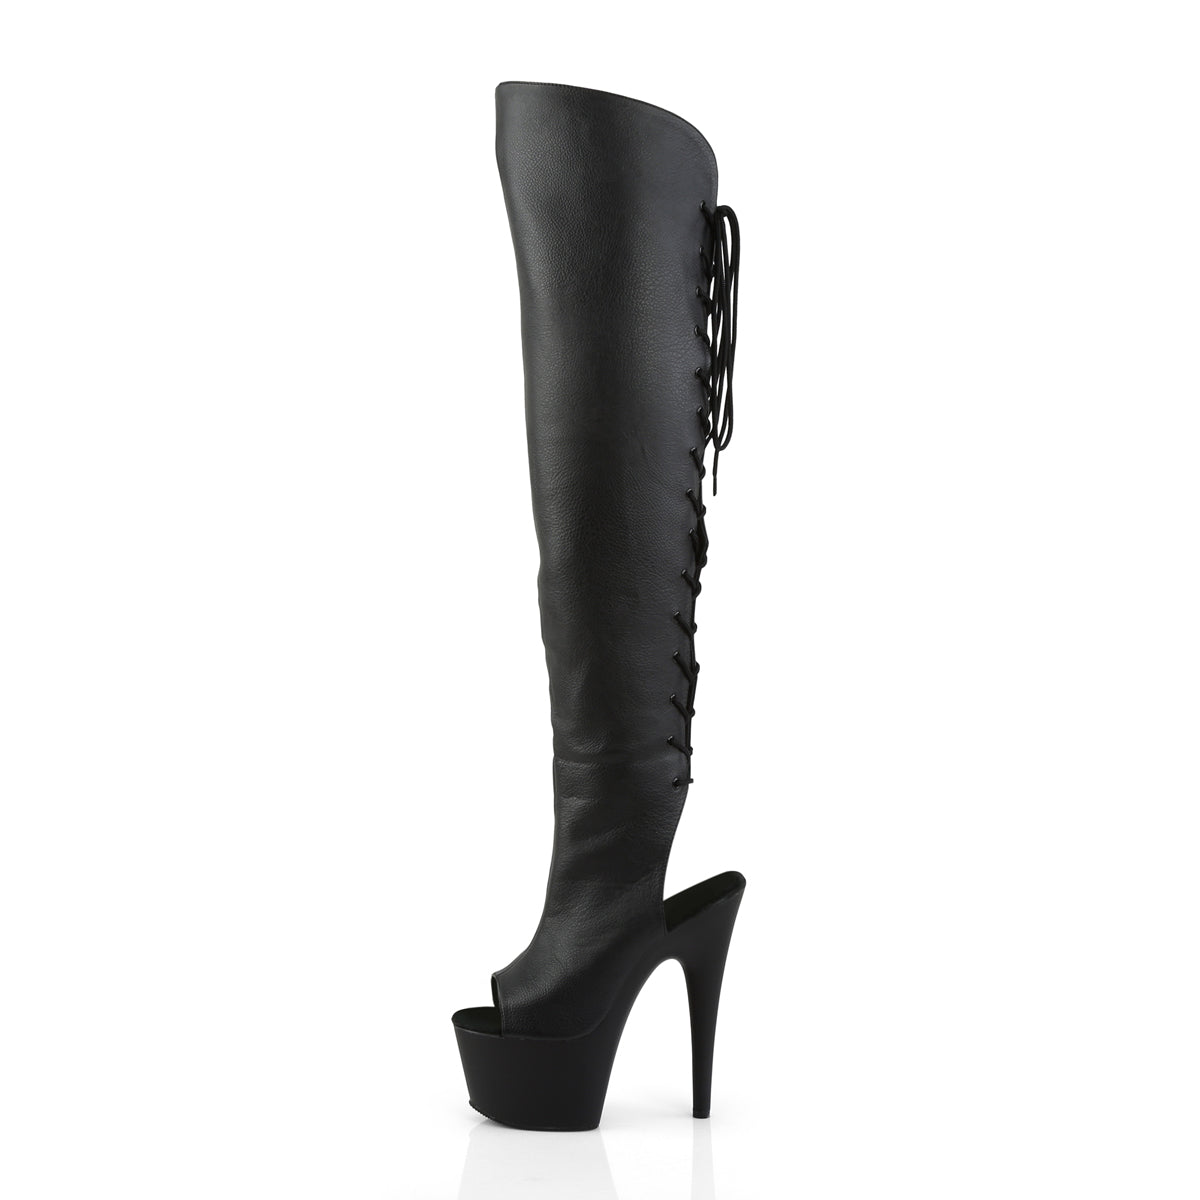 ADORE-3019 7" Heel Black Pole Dancing Thigh High Boots-Pleaser- Sexy Shoes Pole Dance Heels